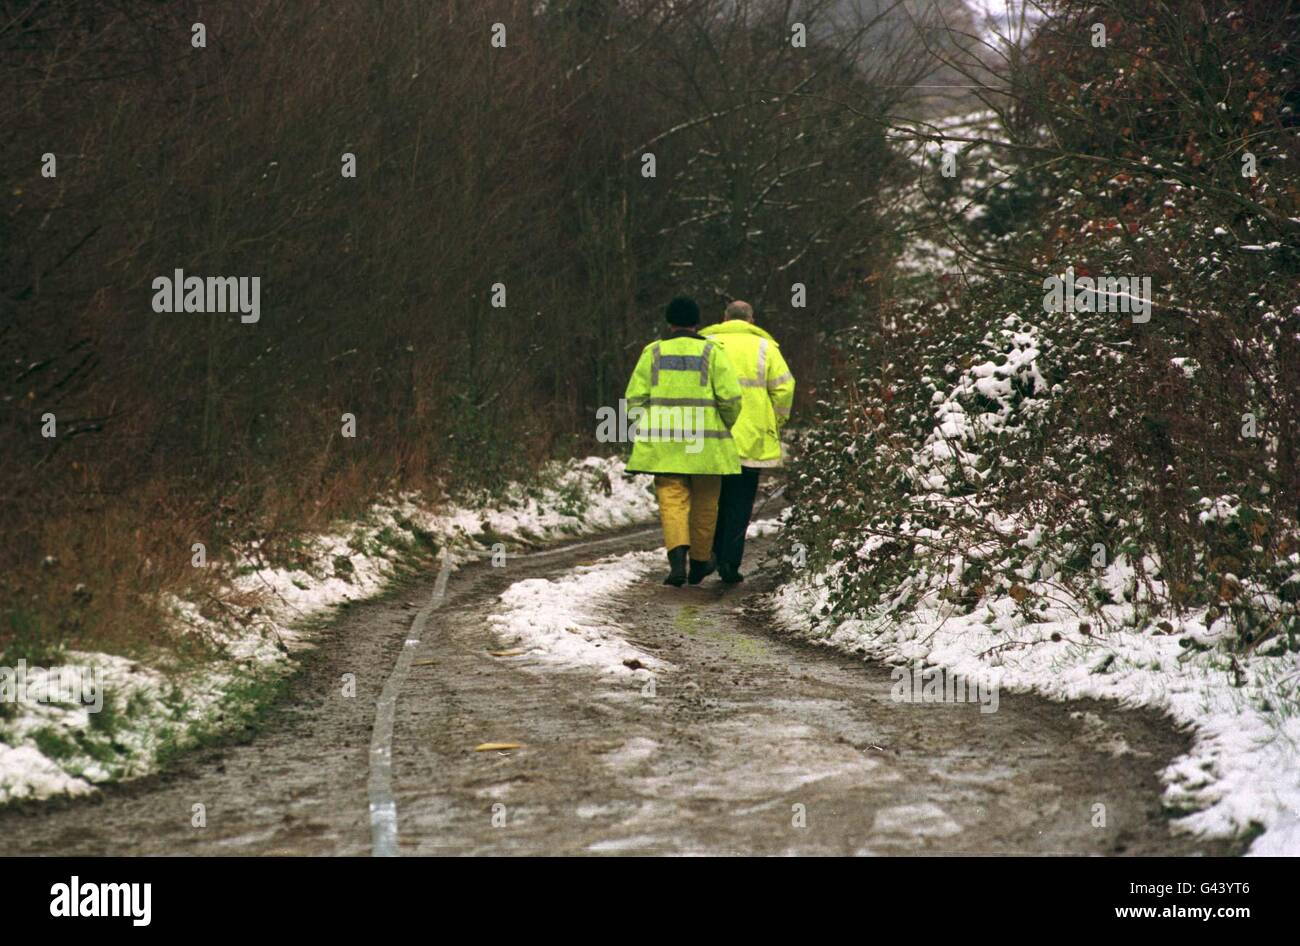 Police search the lane in which a Range Rover car was found with three bodies inside by a local farmer early this morning (Thursday). The murder site in a lane off the A130 between Chelmsford and Southend, near Rettenden, Essex, was sealed off by police who said the men had all been shot at close range. Stock Photo